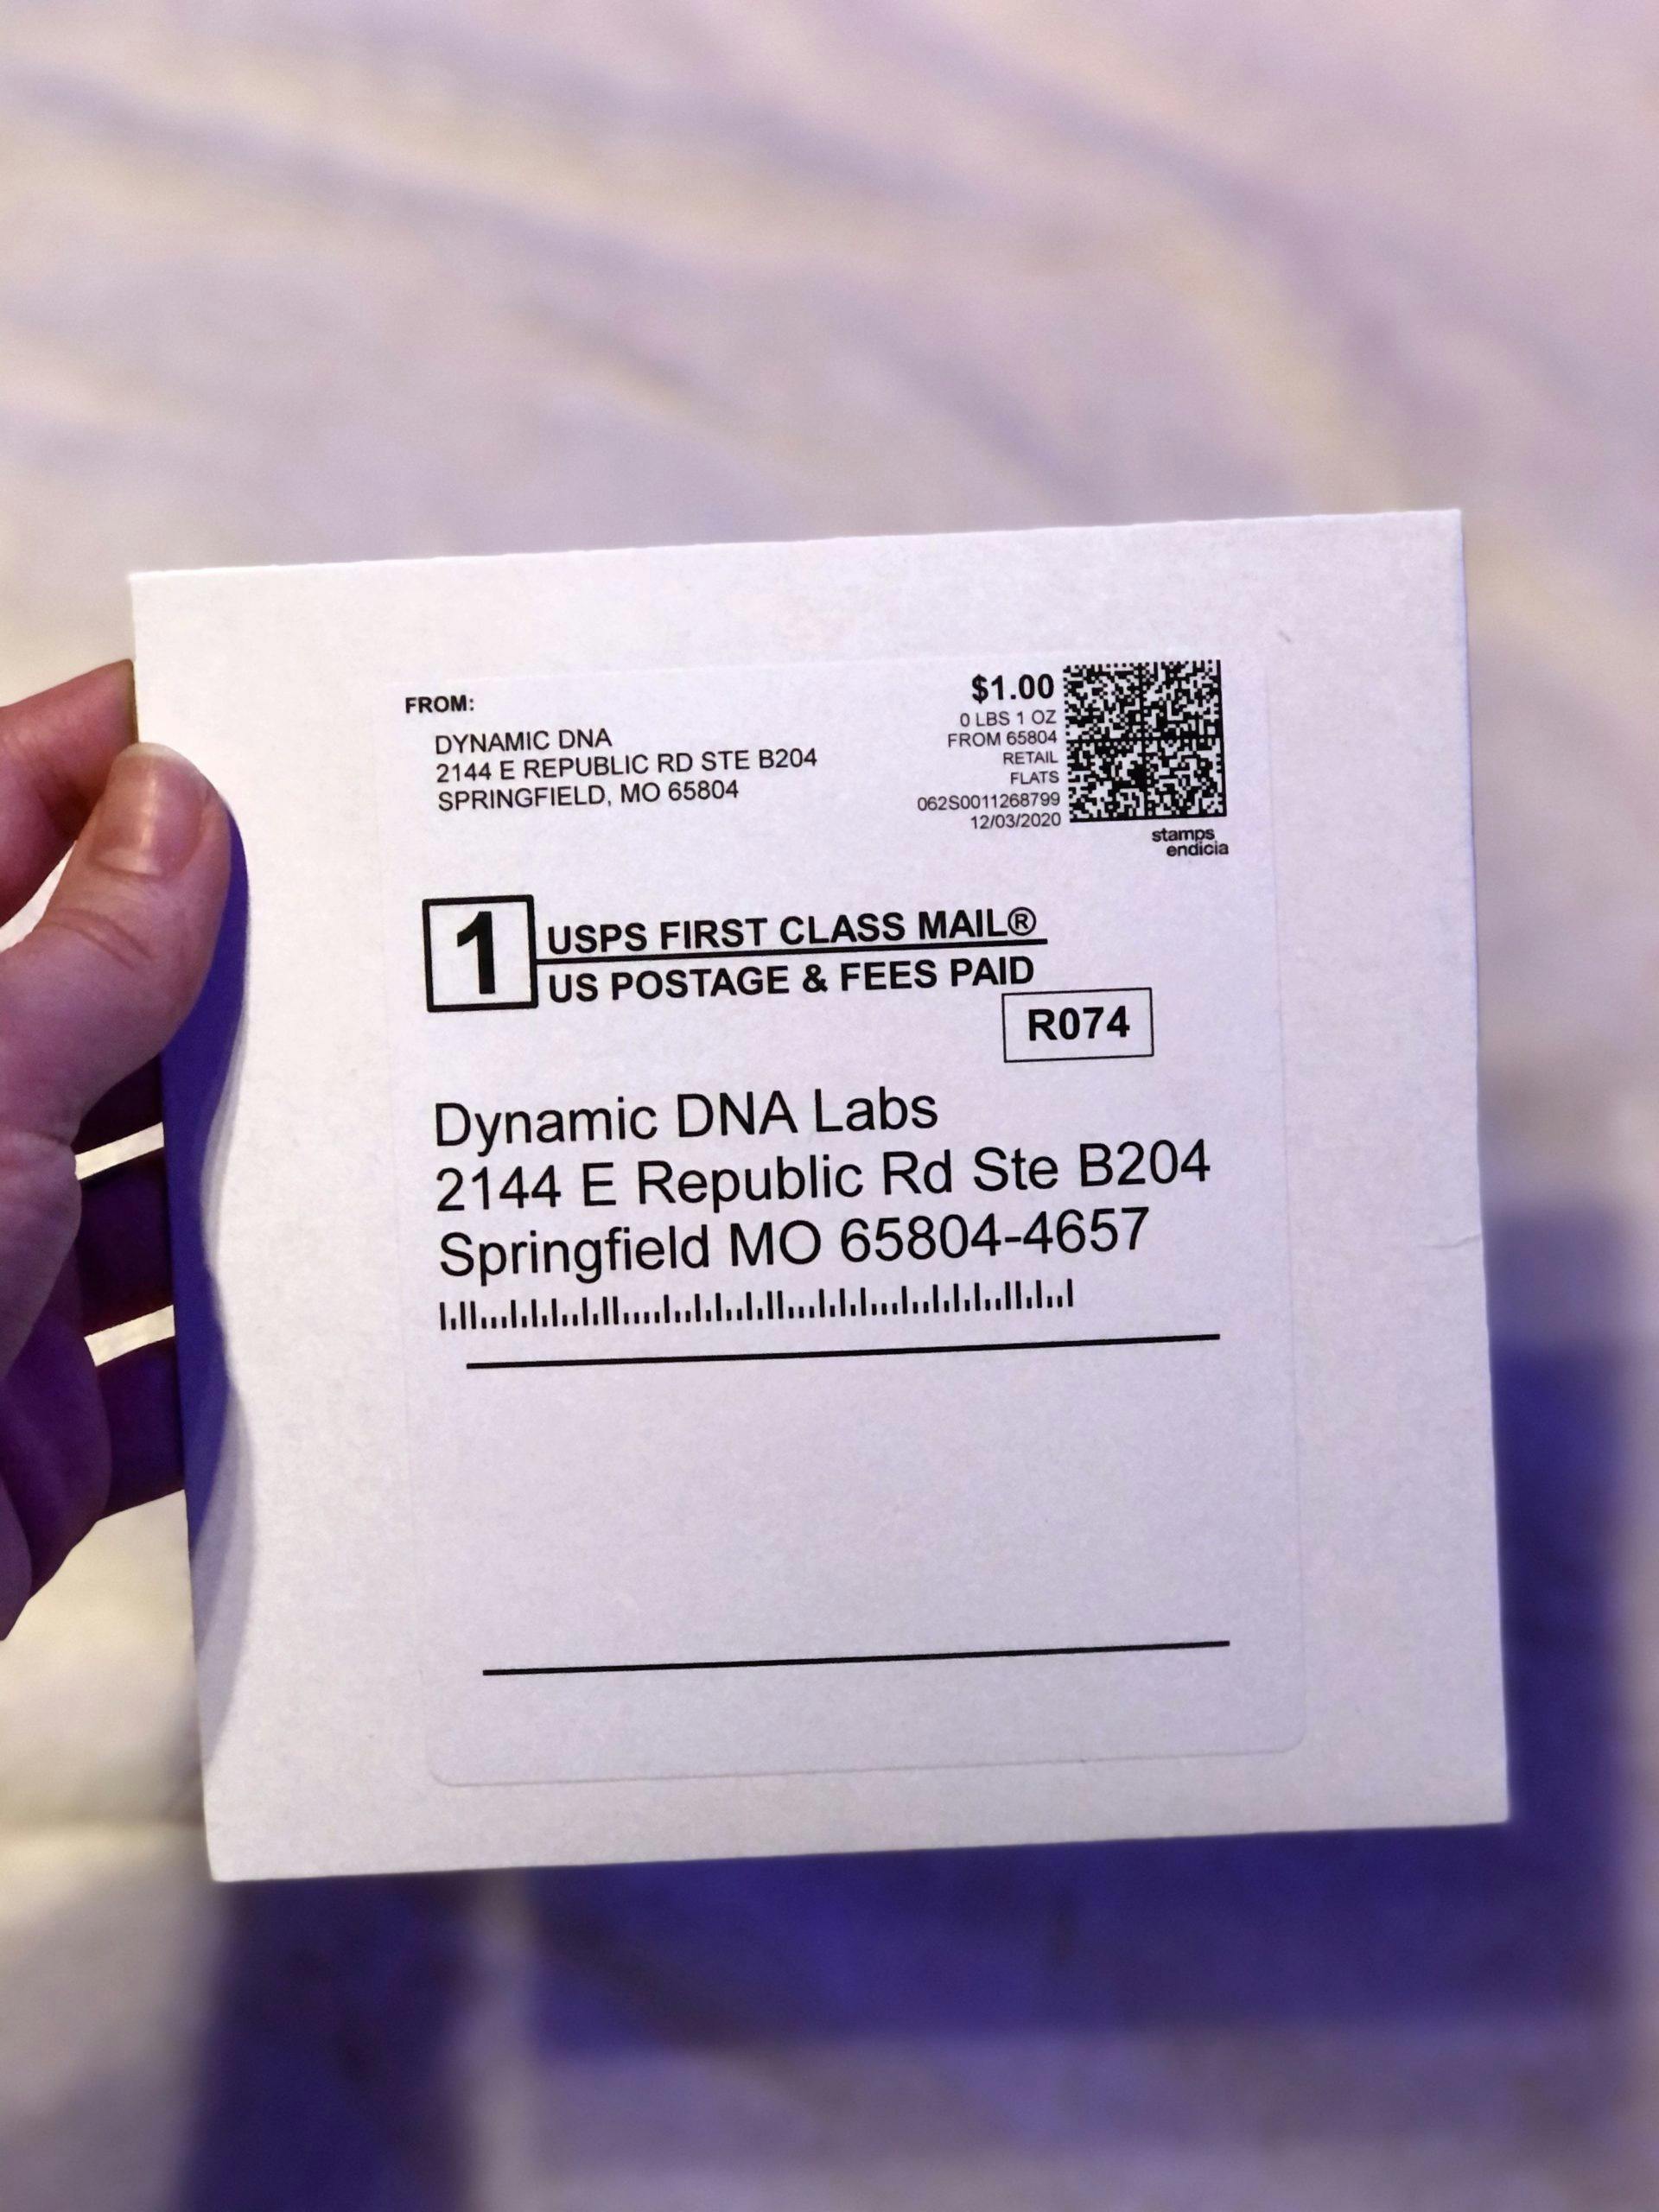 Dynamic DNA Labs' pre-paid cardboard mailer.